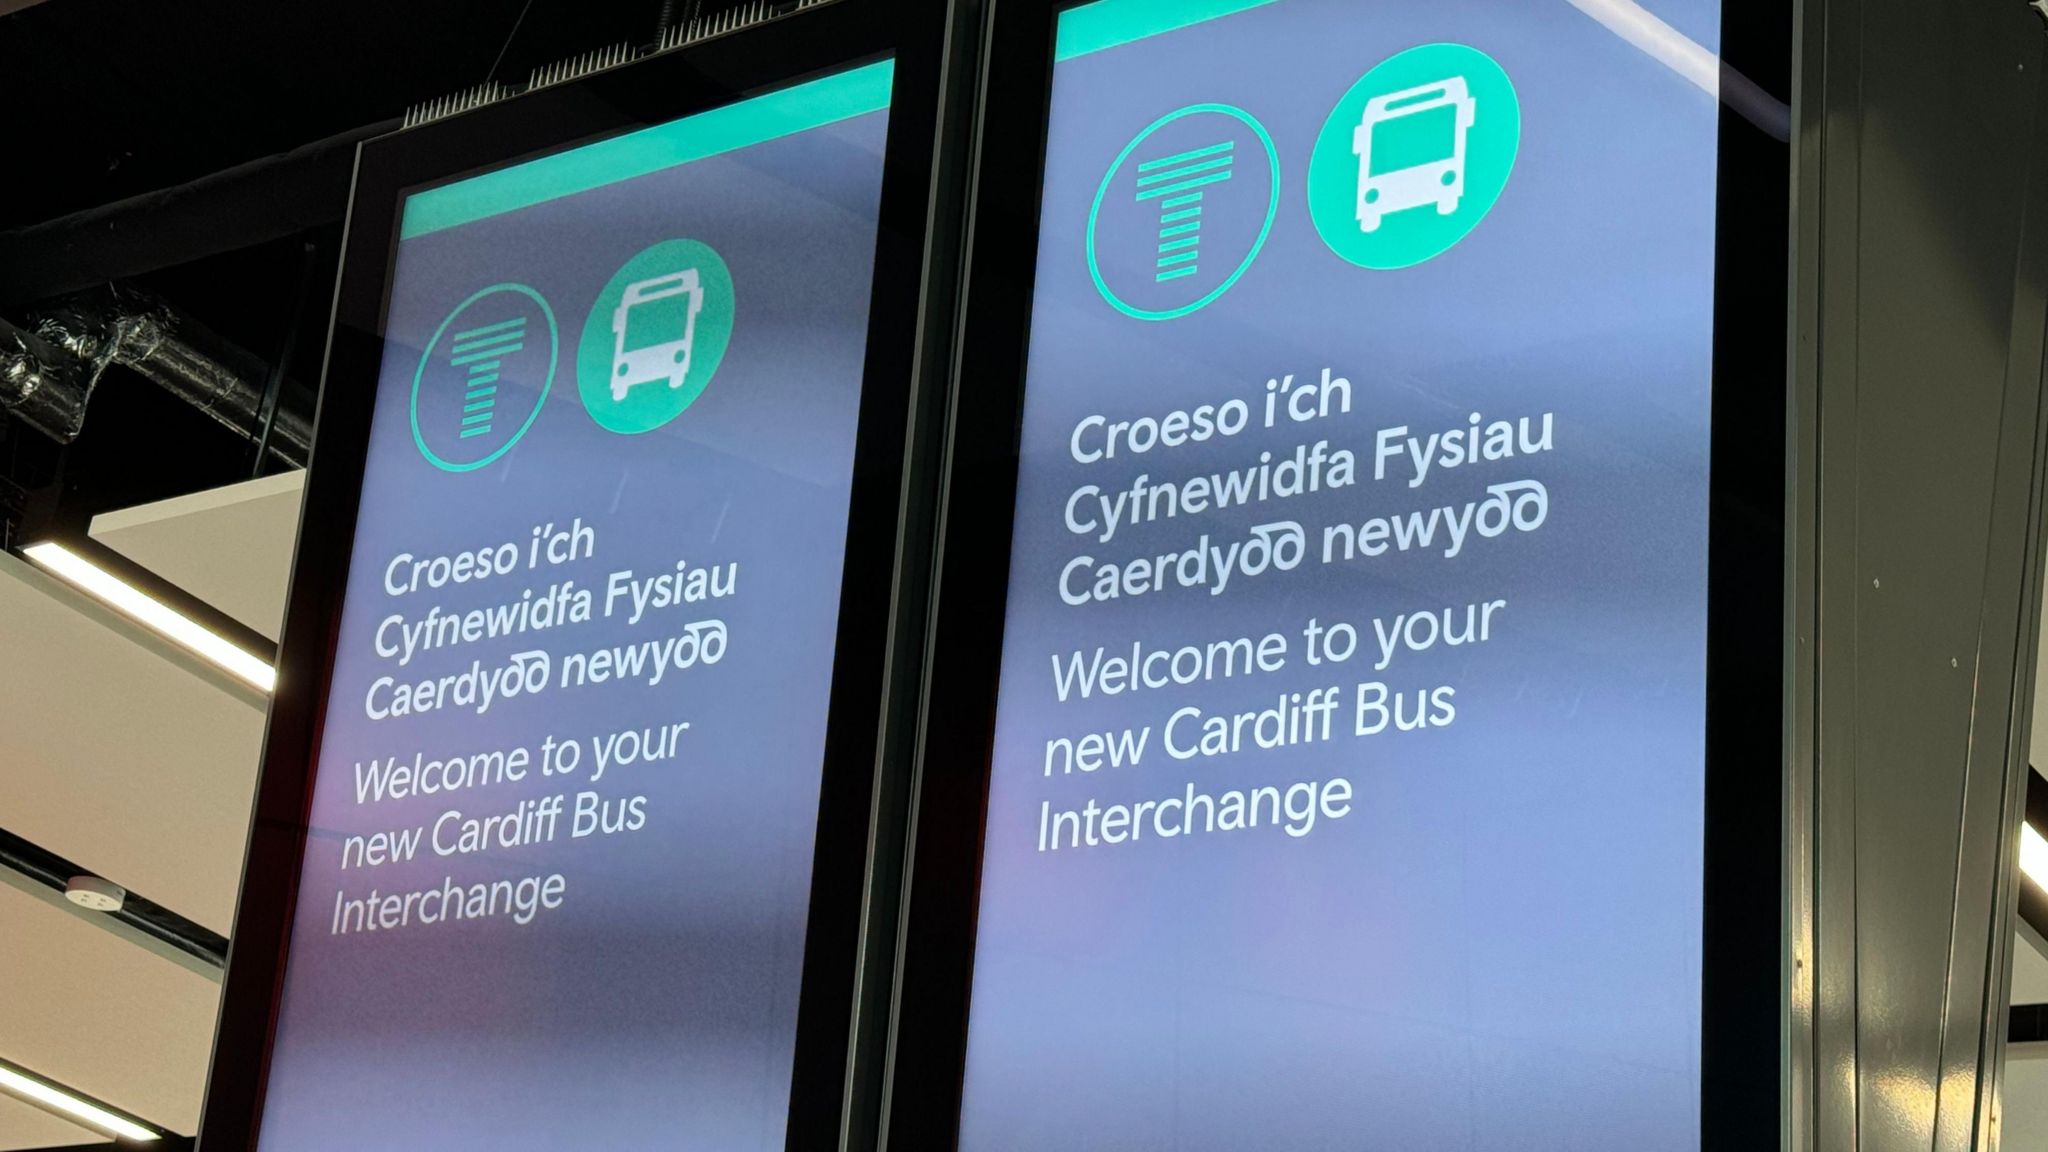 Signs inside Cardiff's new bus station read "welcome to your new Cardiff Bus Interchange"